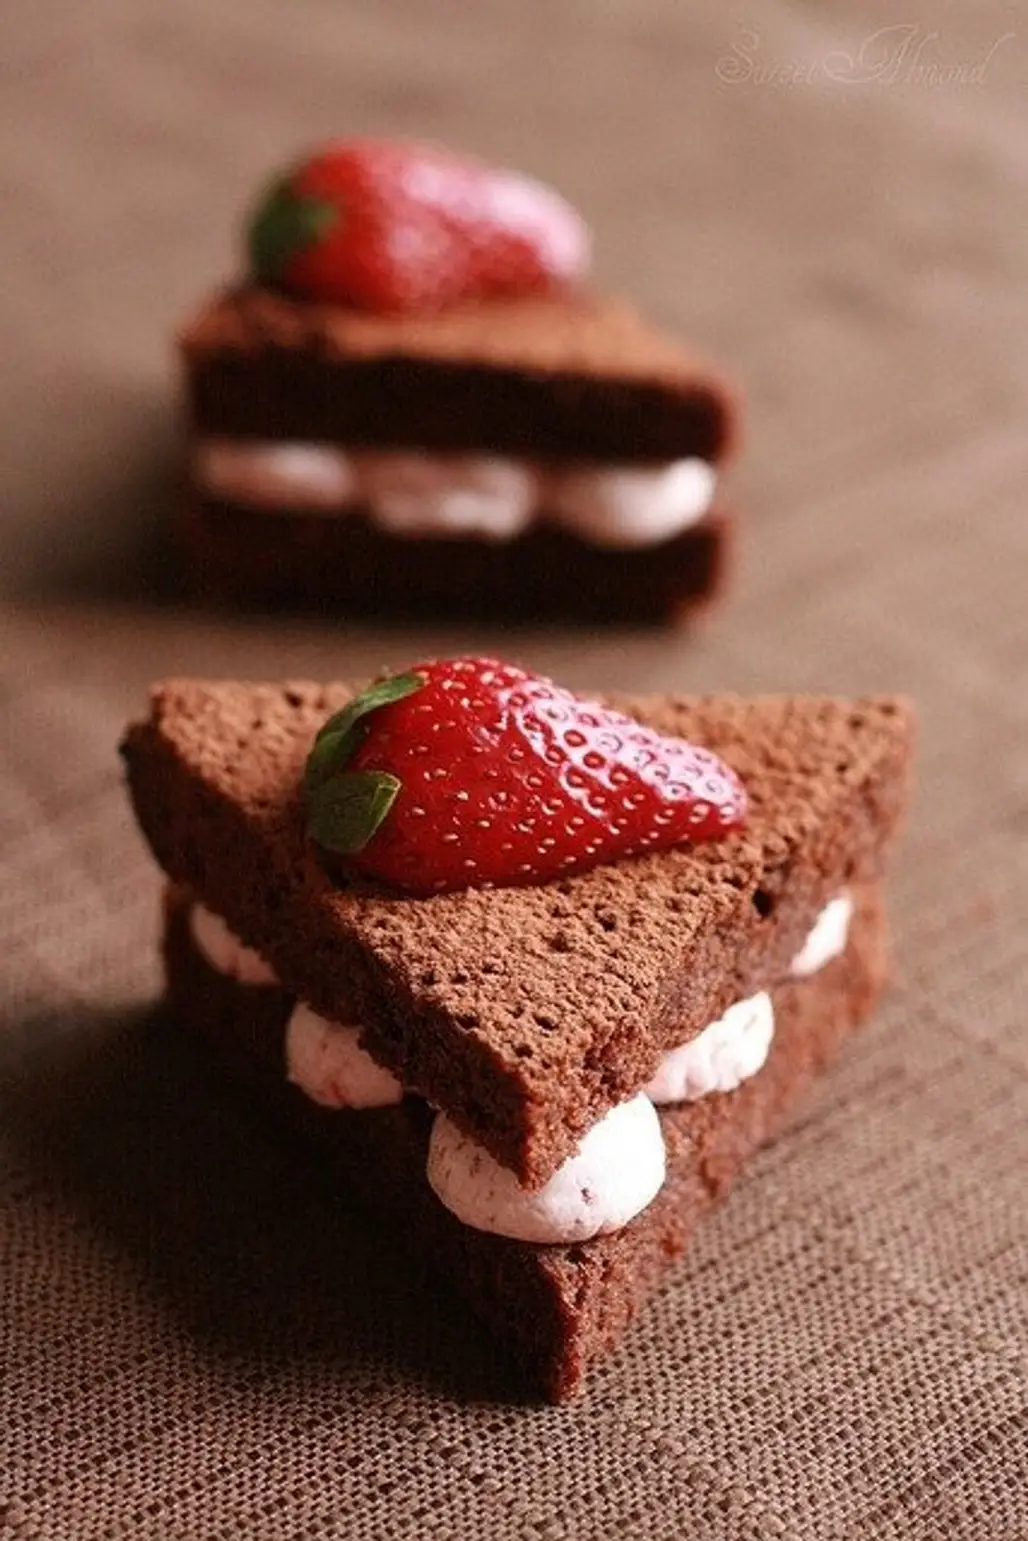 Chocolate Cake Sandwich..cut Triangles of Chocolate Cake, Pipe Frosting in between the "sandwich" and Add a Strawberry!